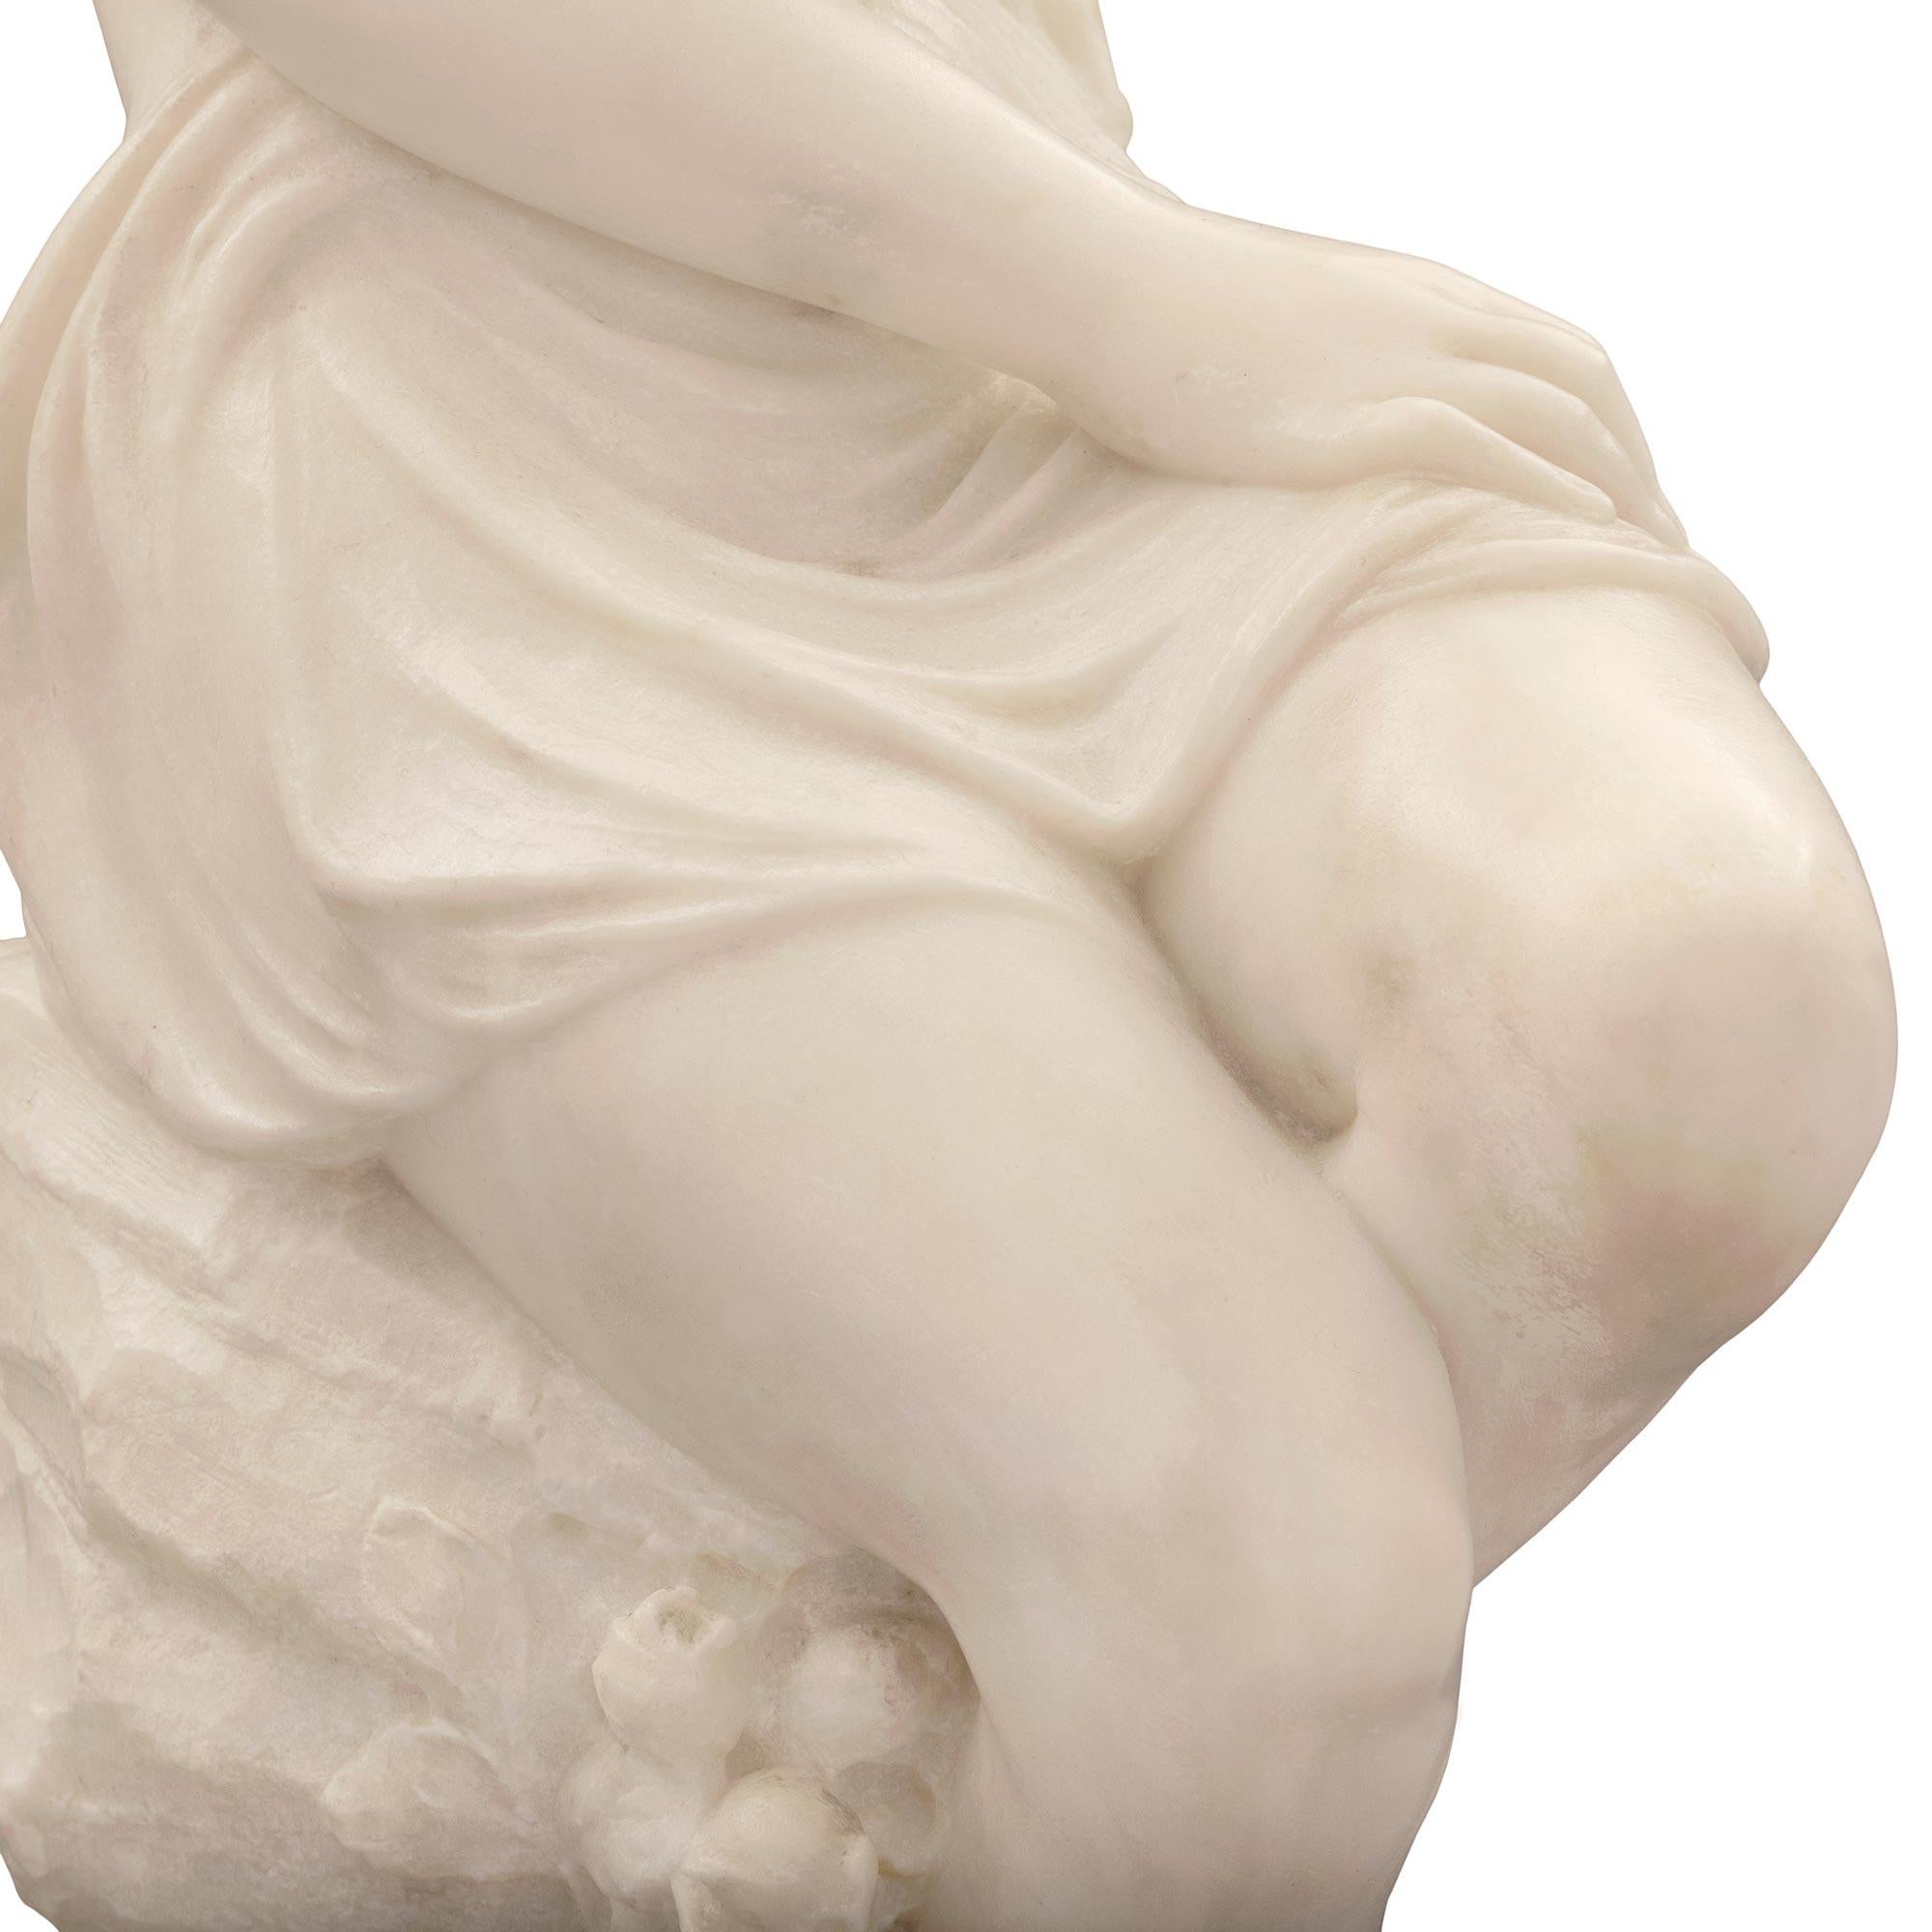 Italian 19th Century Marble Statue of Psyche on Her Original Pedestal For Sale 6